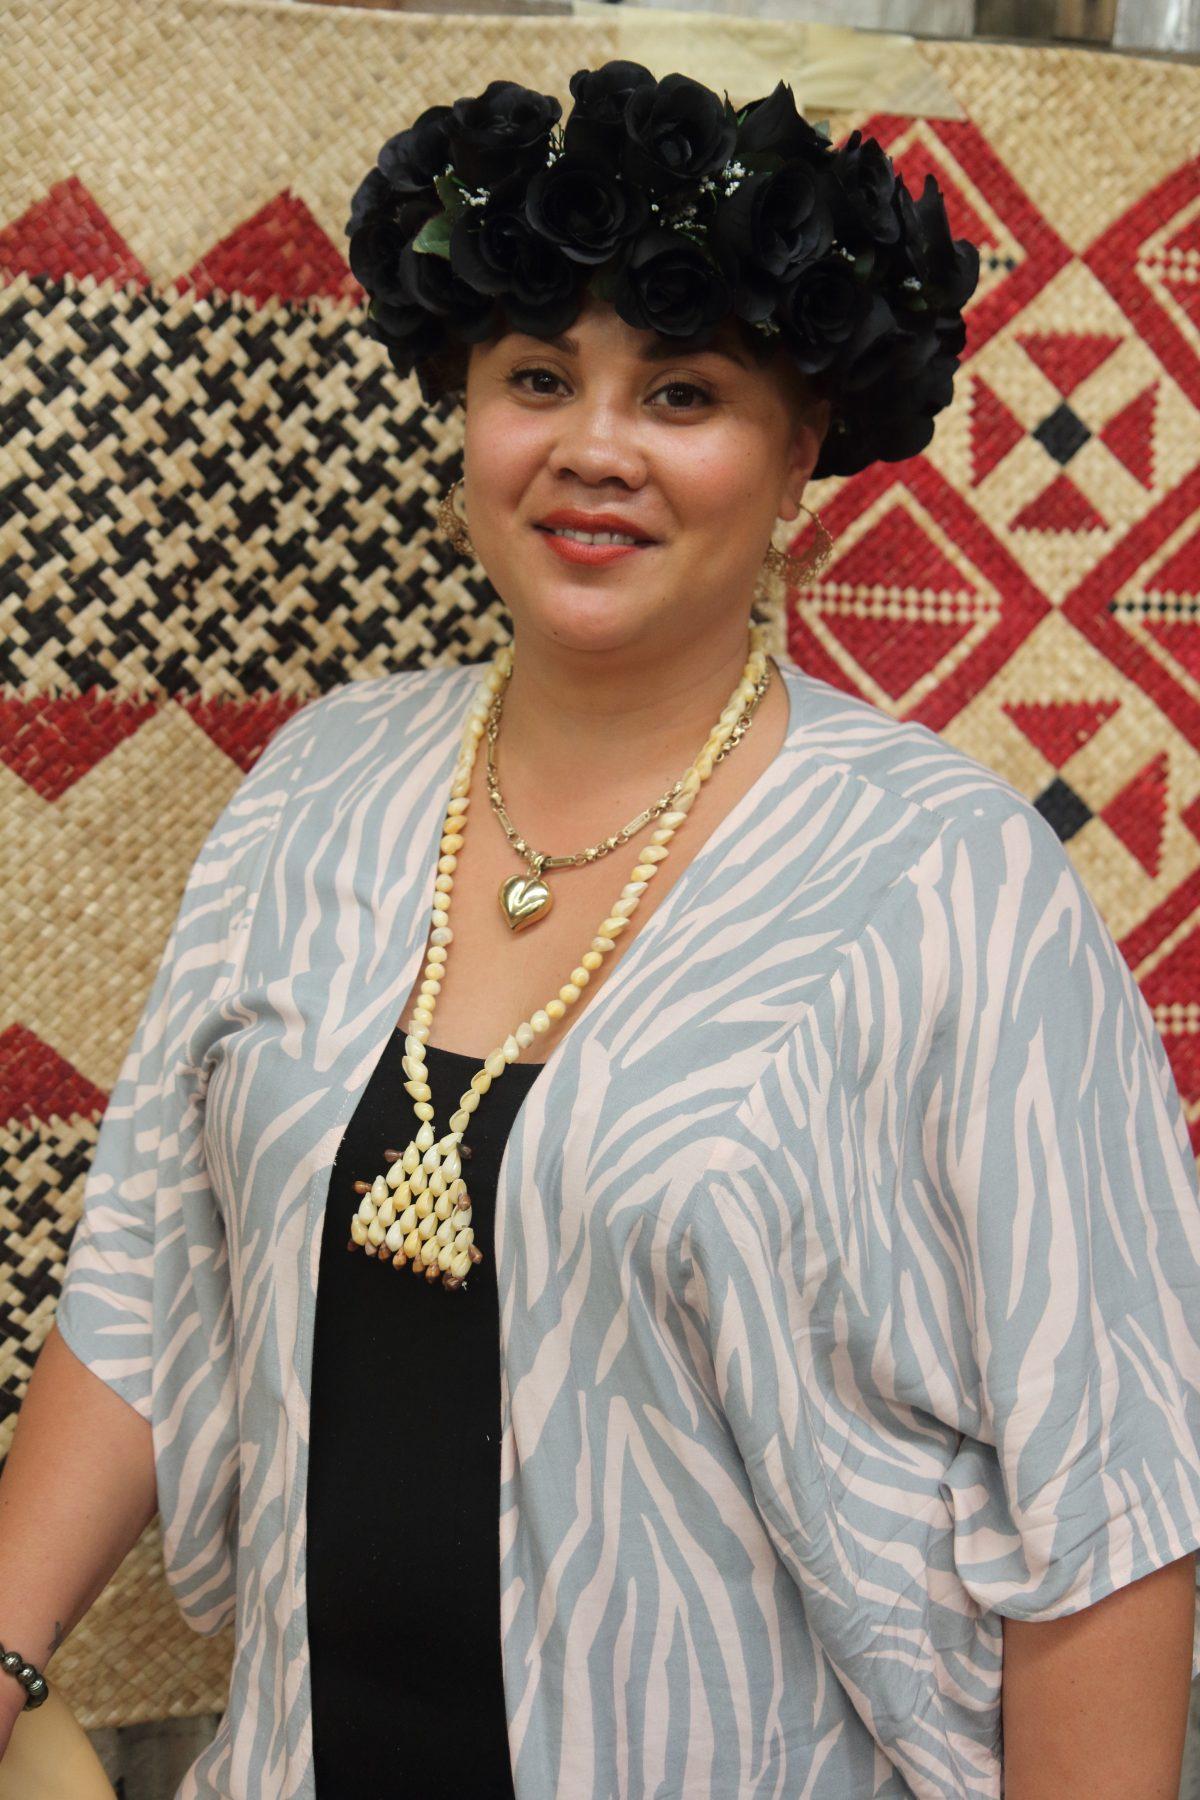 Jarcinda Stowers-Ama, director of the Pacifica Arts Center, at the Tuvalu Arts Festival in Auckland, New Zealand, on April 27, 2019. (Lorraine Ferrier/The Epoch Times)